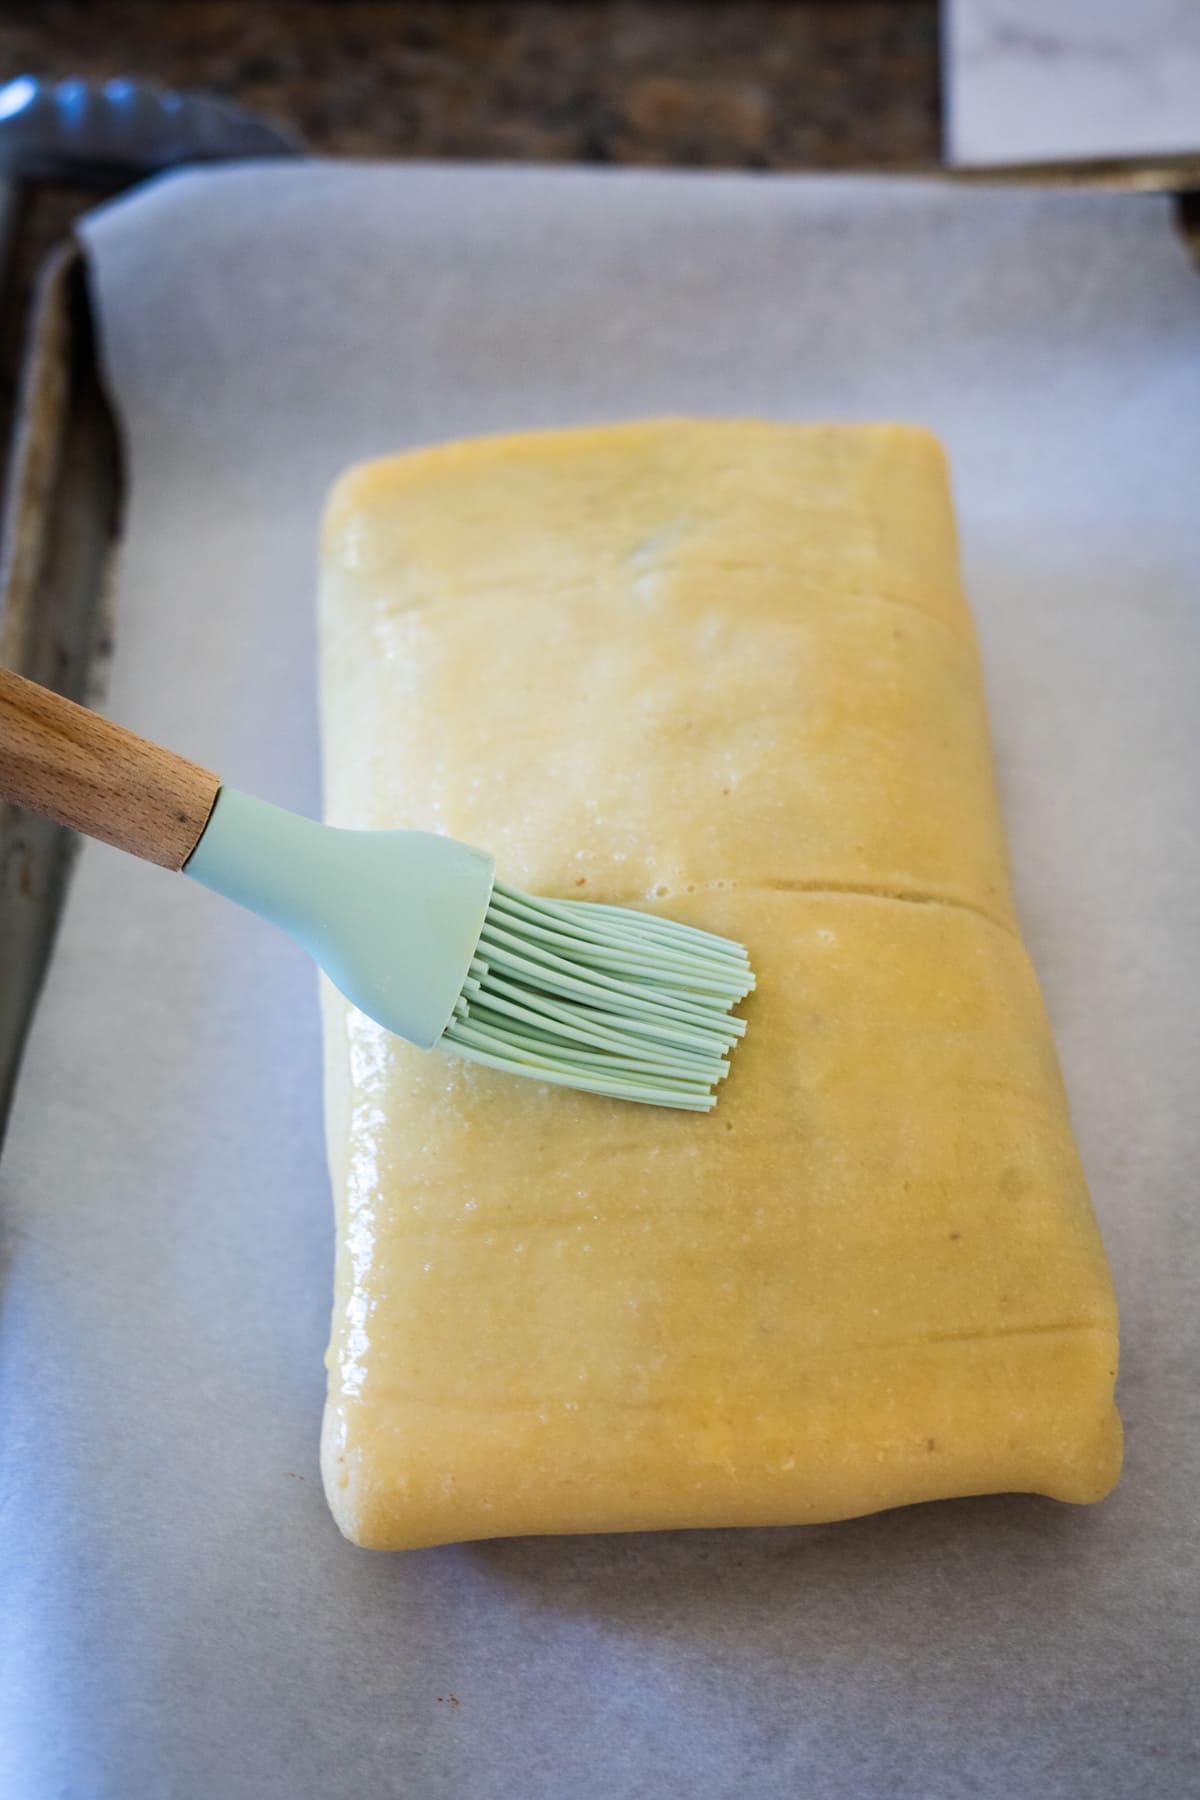 A person is using a brush to brush a piece of dough onto a baking sheet to prepare a vegetable wellington.